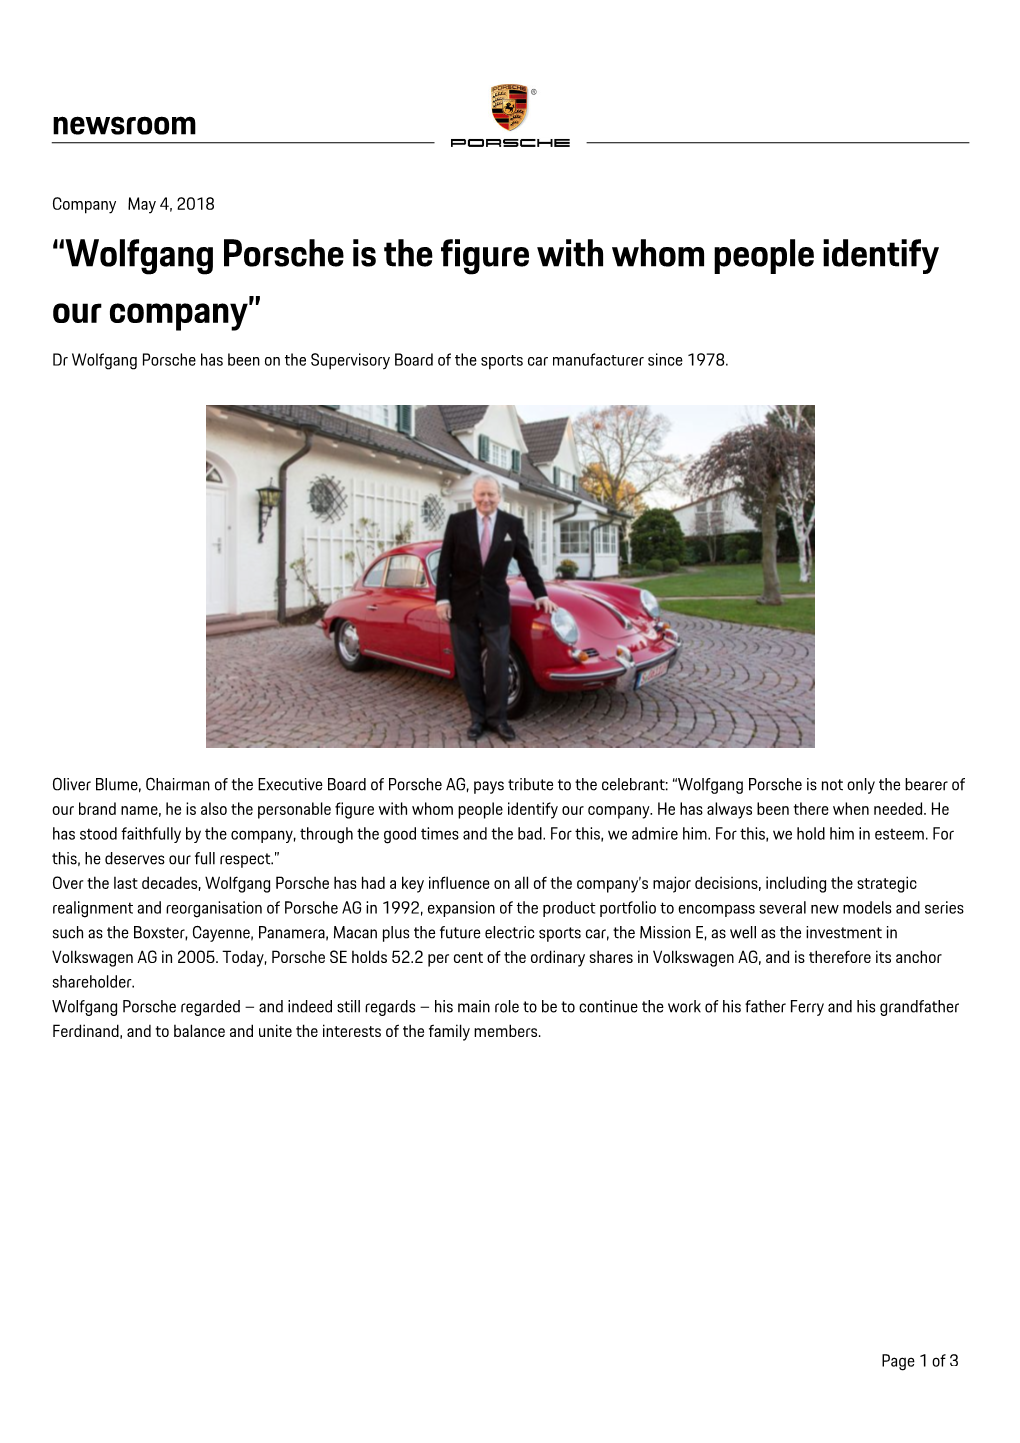 “Wolfgang Porsche Is the Figure with Whom People Identify Our Company” Dr Wolfgang Porsche Has Been on the Supervisory Board of the Sports Car Manufacturer Since 1978